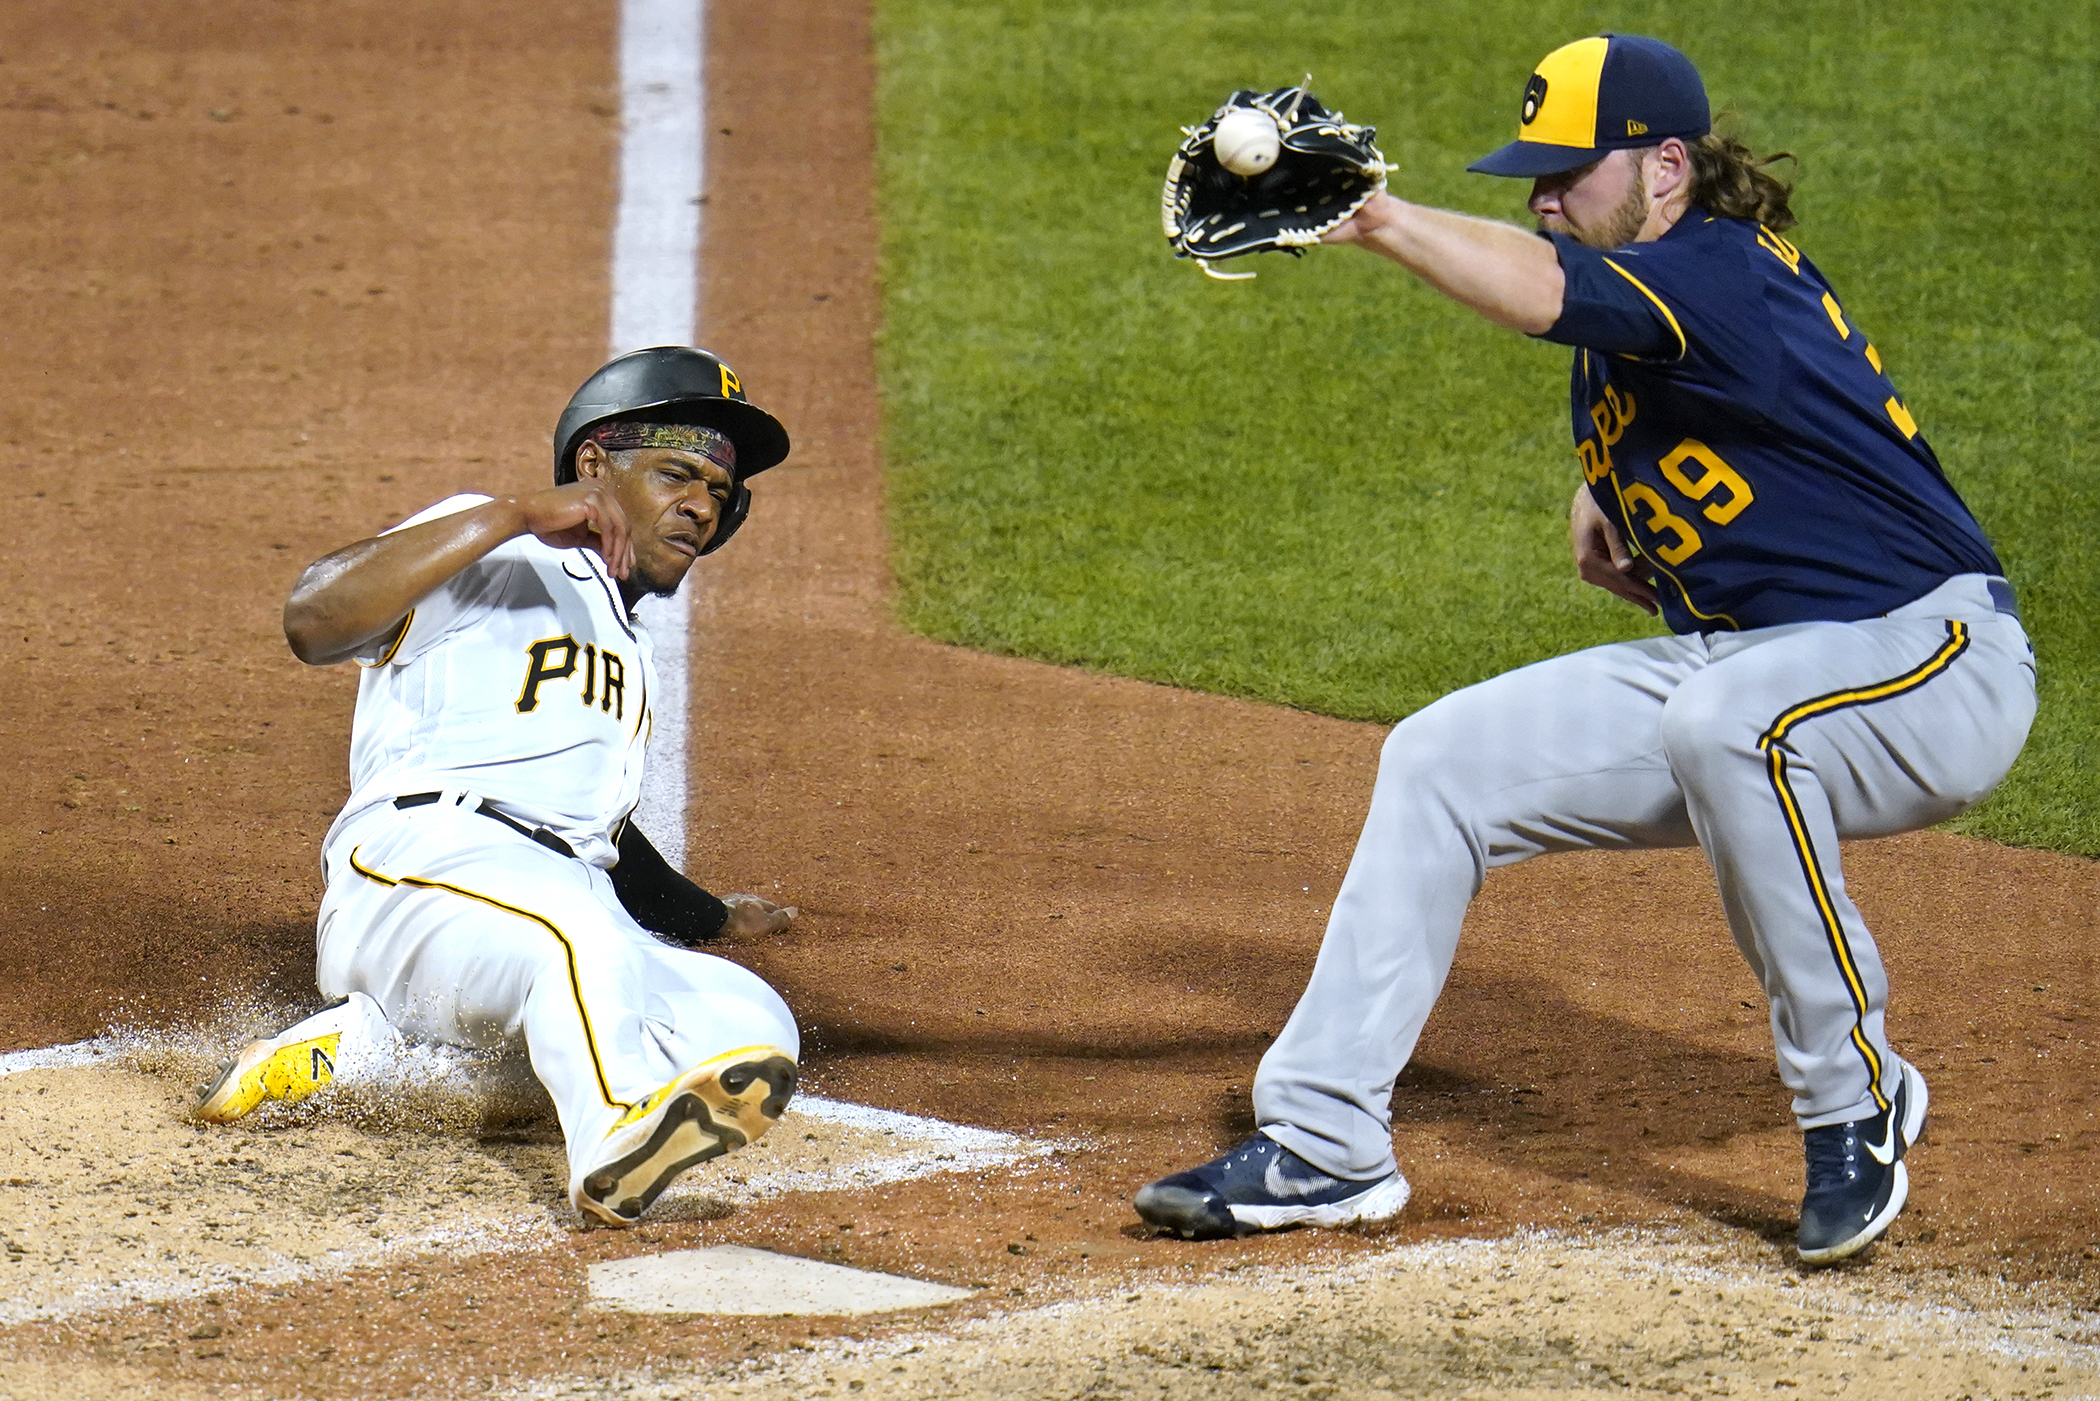 Pittsburgh Pirates and Milwaukee Brewers played an amazing game in